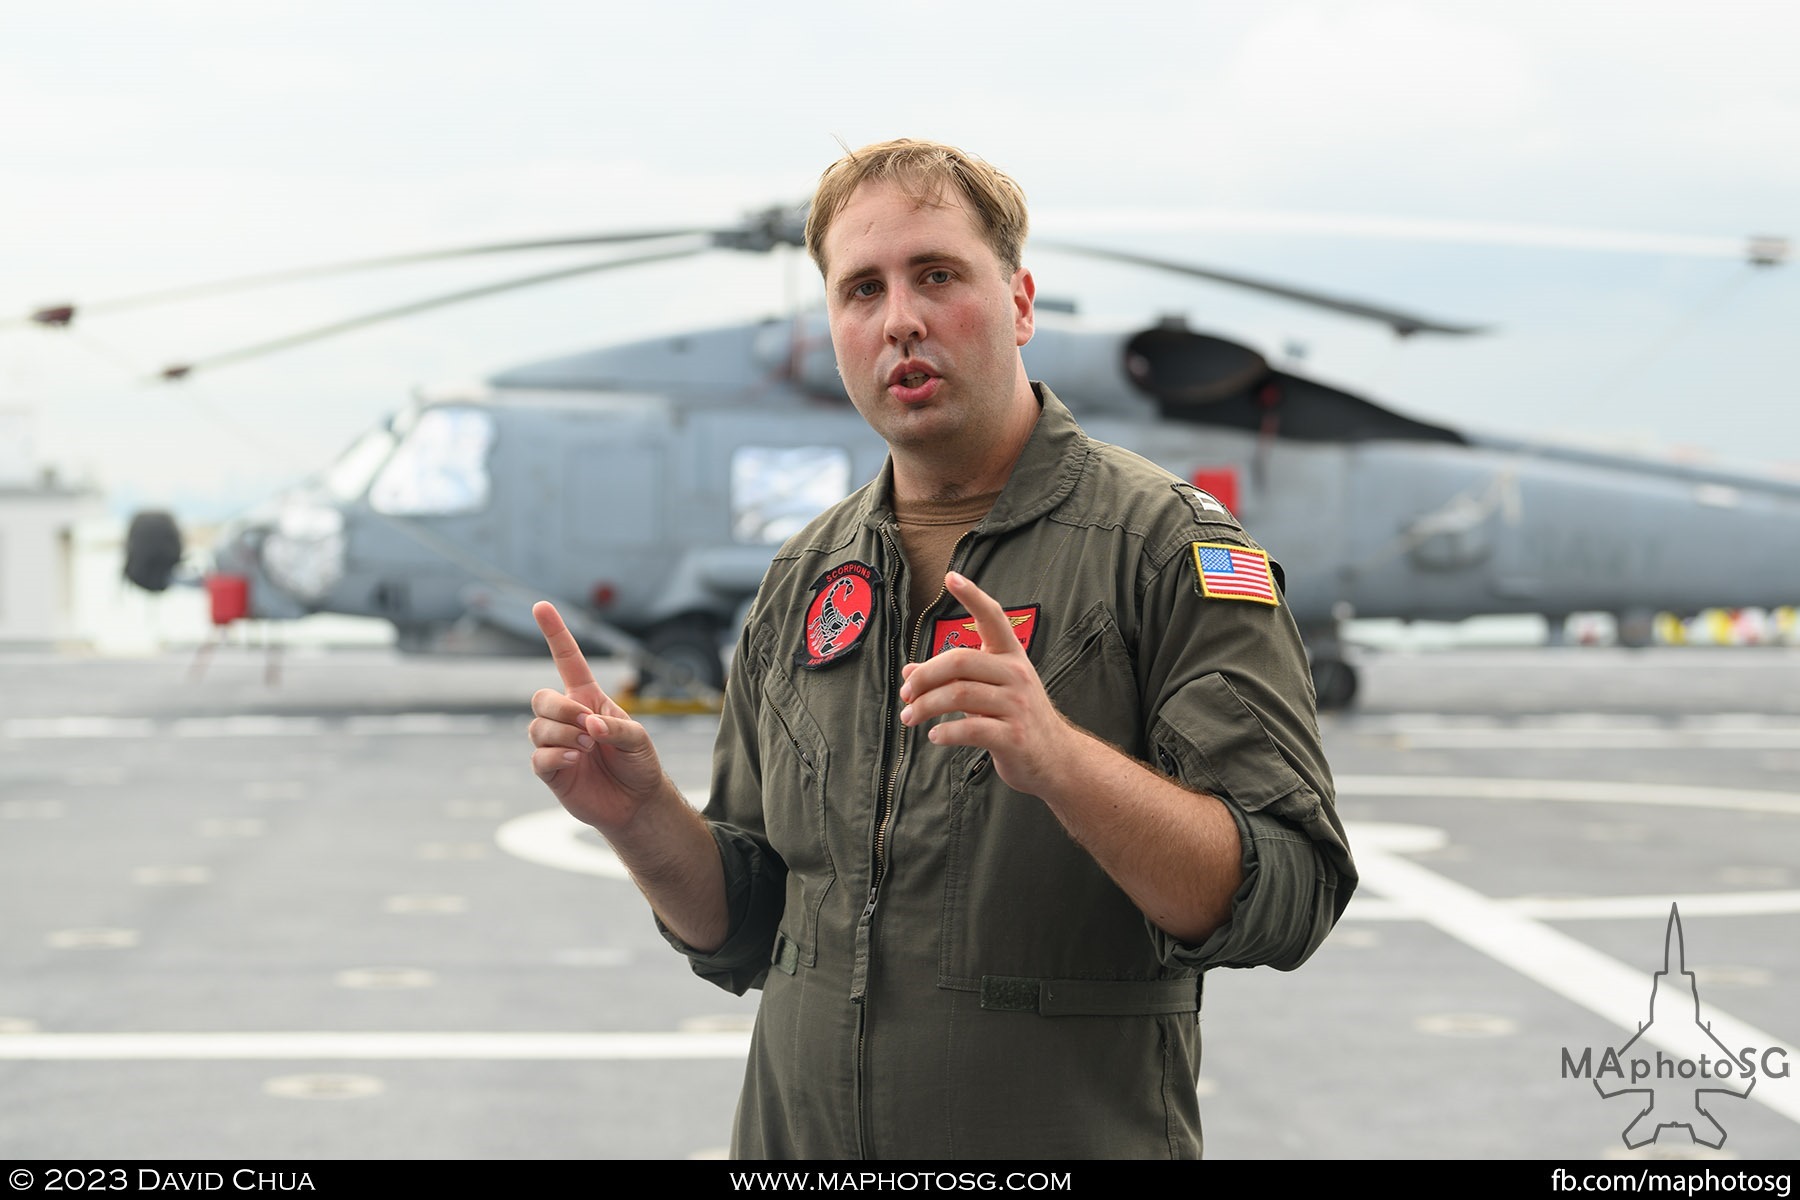 Pilot of the MH-60 Seahawk helicopter explaining about his helicopter on board the USS Mobile (LCS 26)